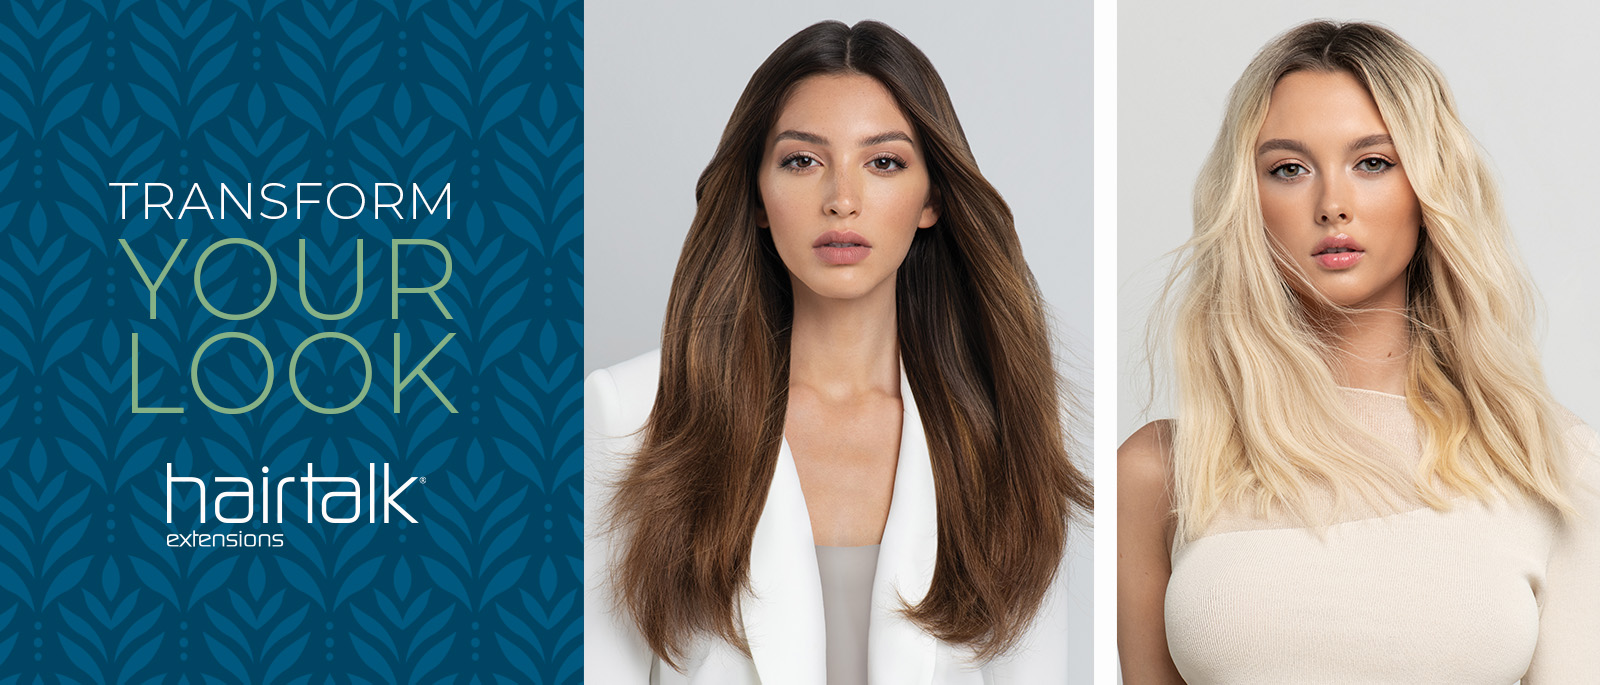 Transform your look with hairtalk extensions. Image also contains a brunette and a blonde lady showing off their gorgeous hair extensions.